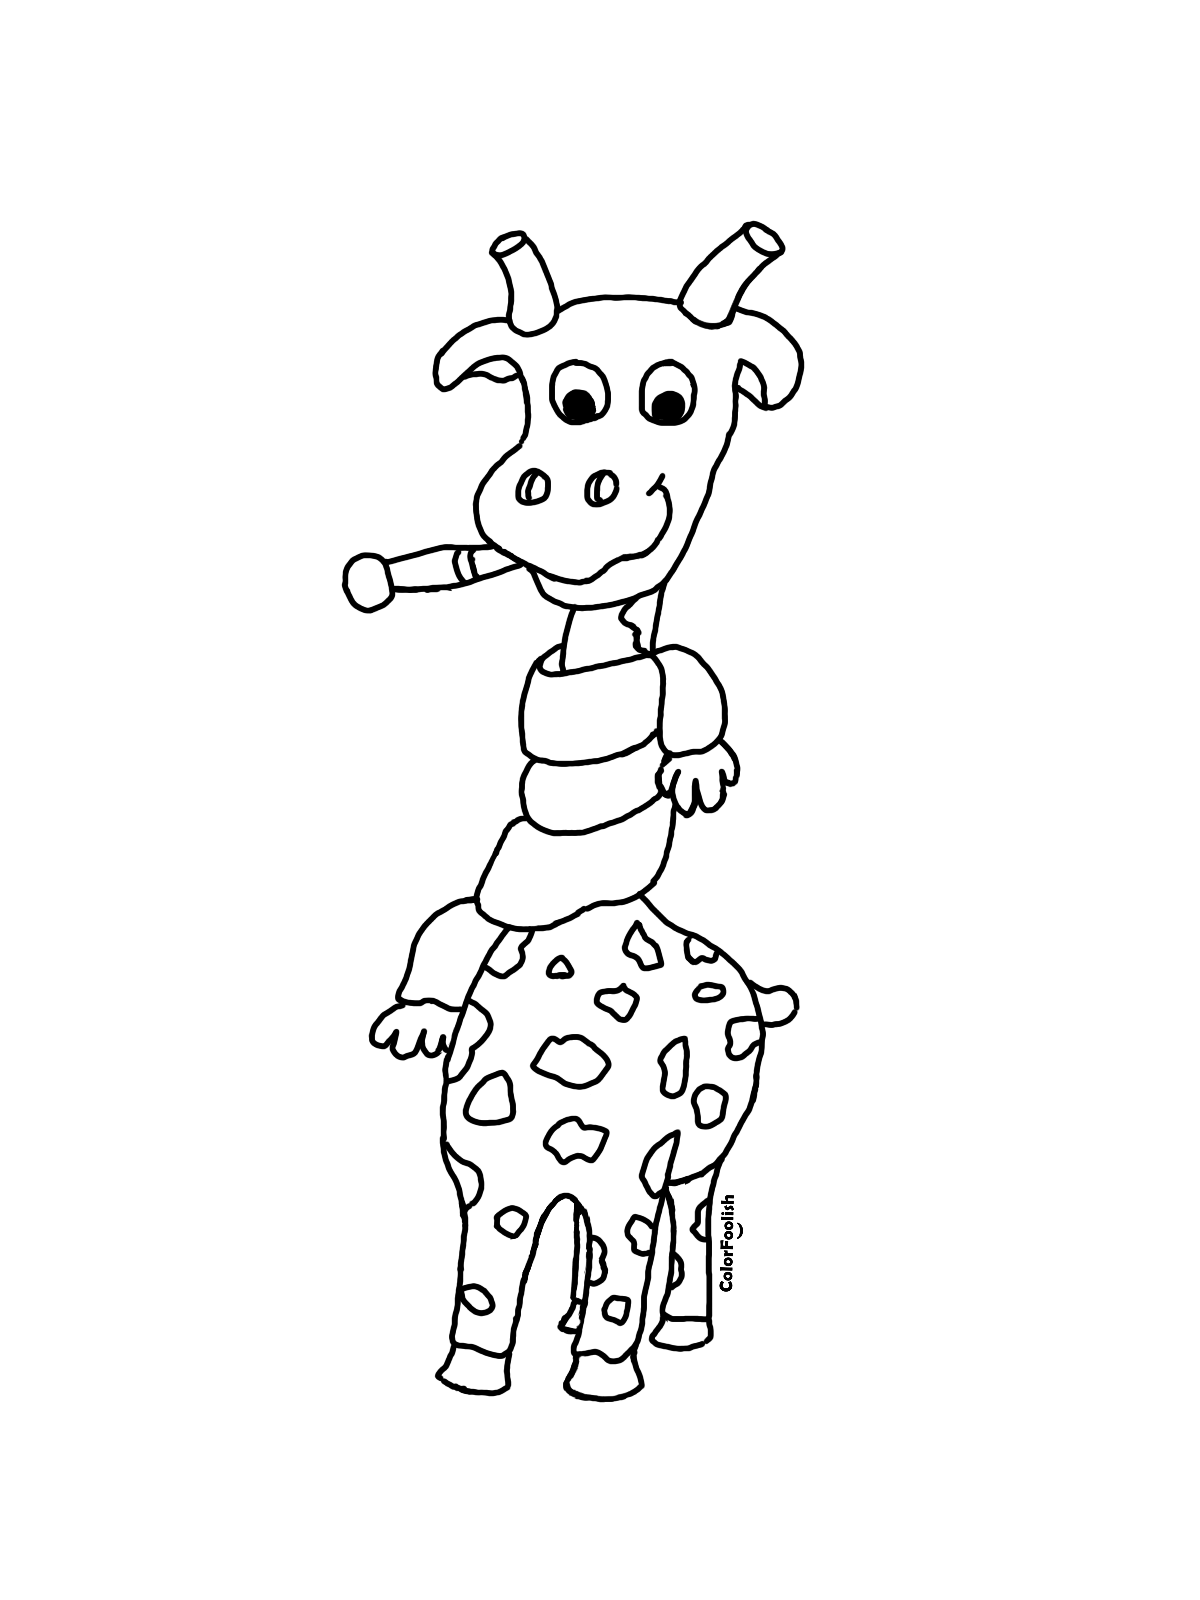 Coloring page of a sick giraffe with a cold